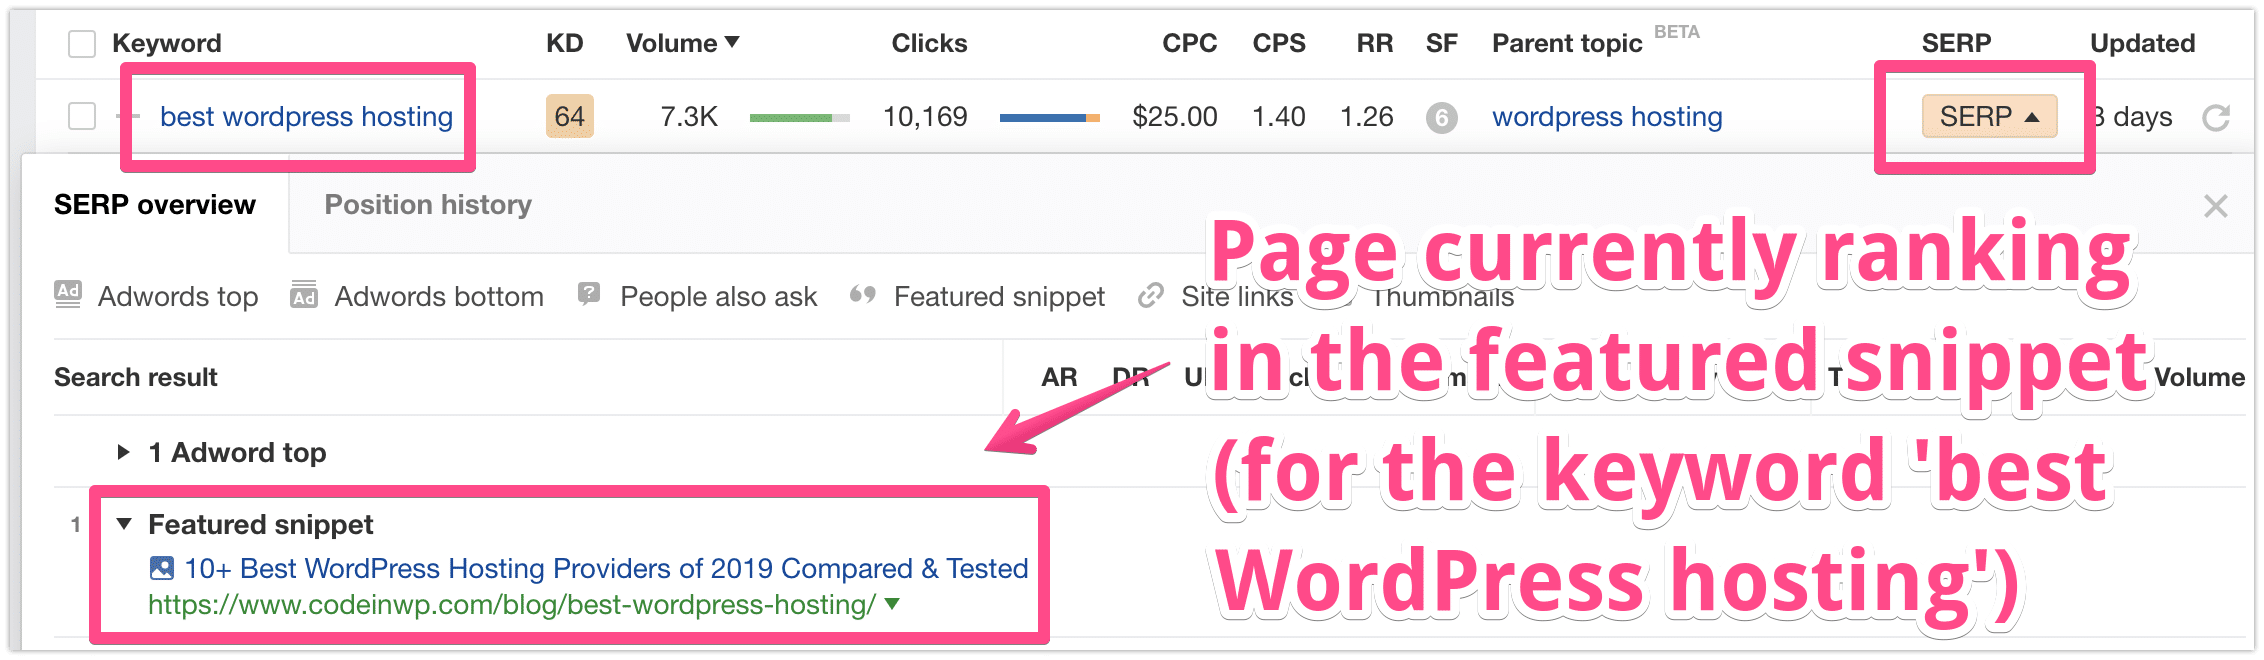 Page ranking for featured snippet in SERPs